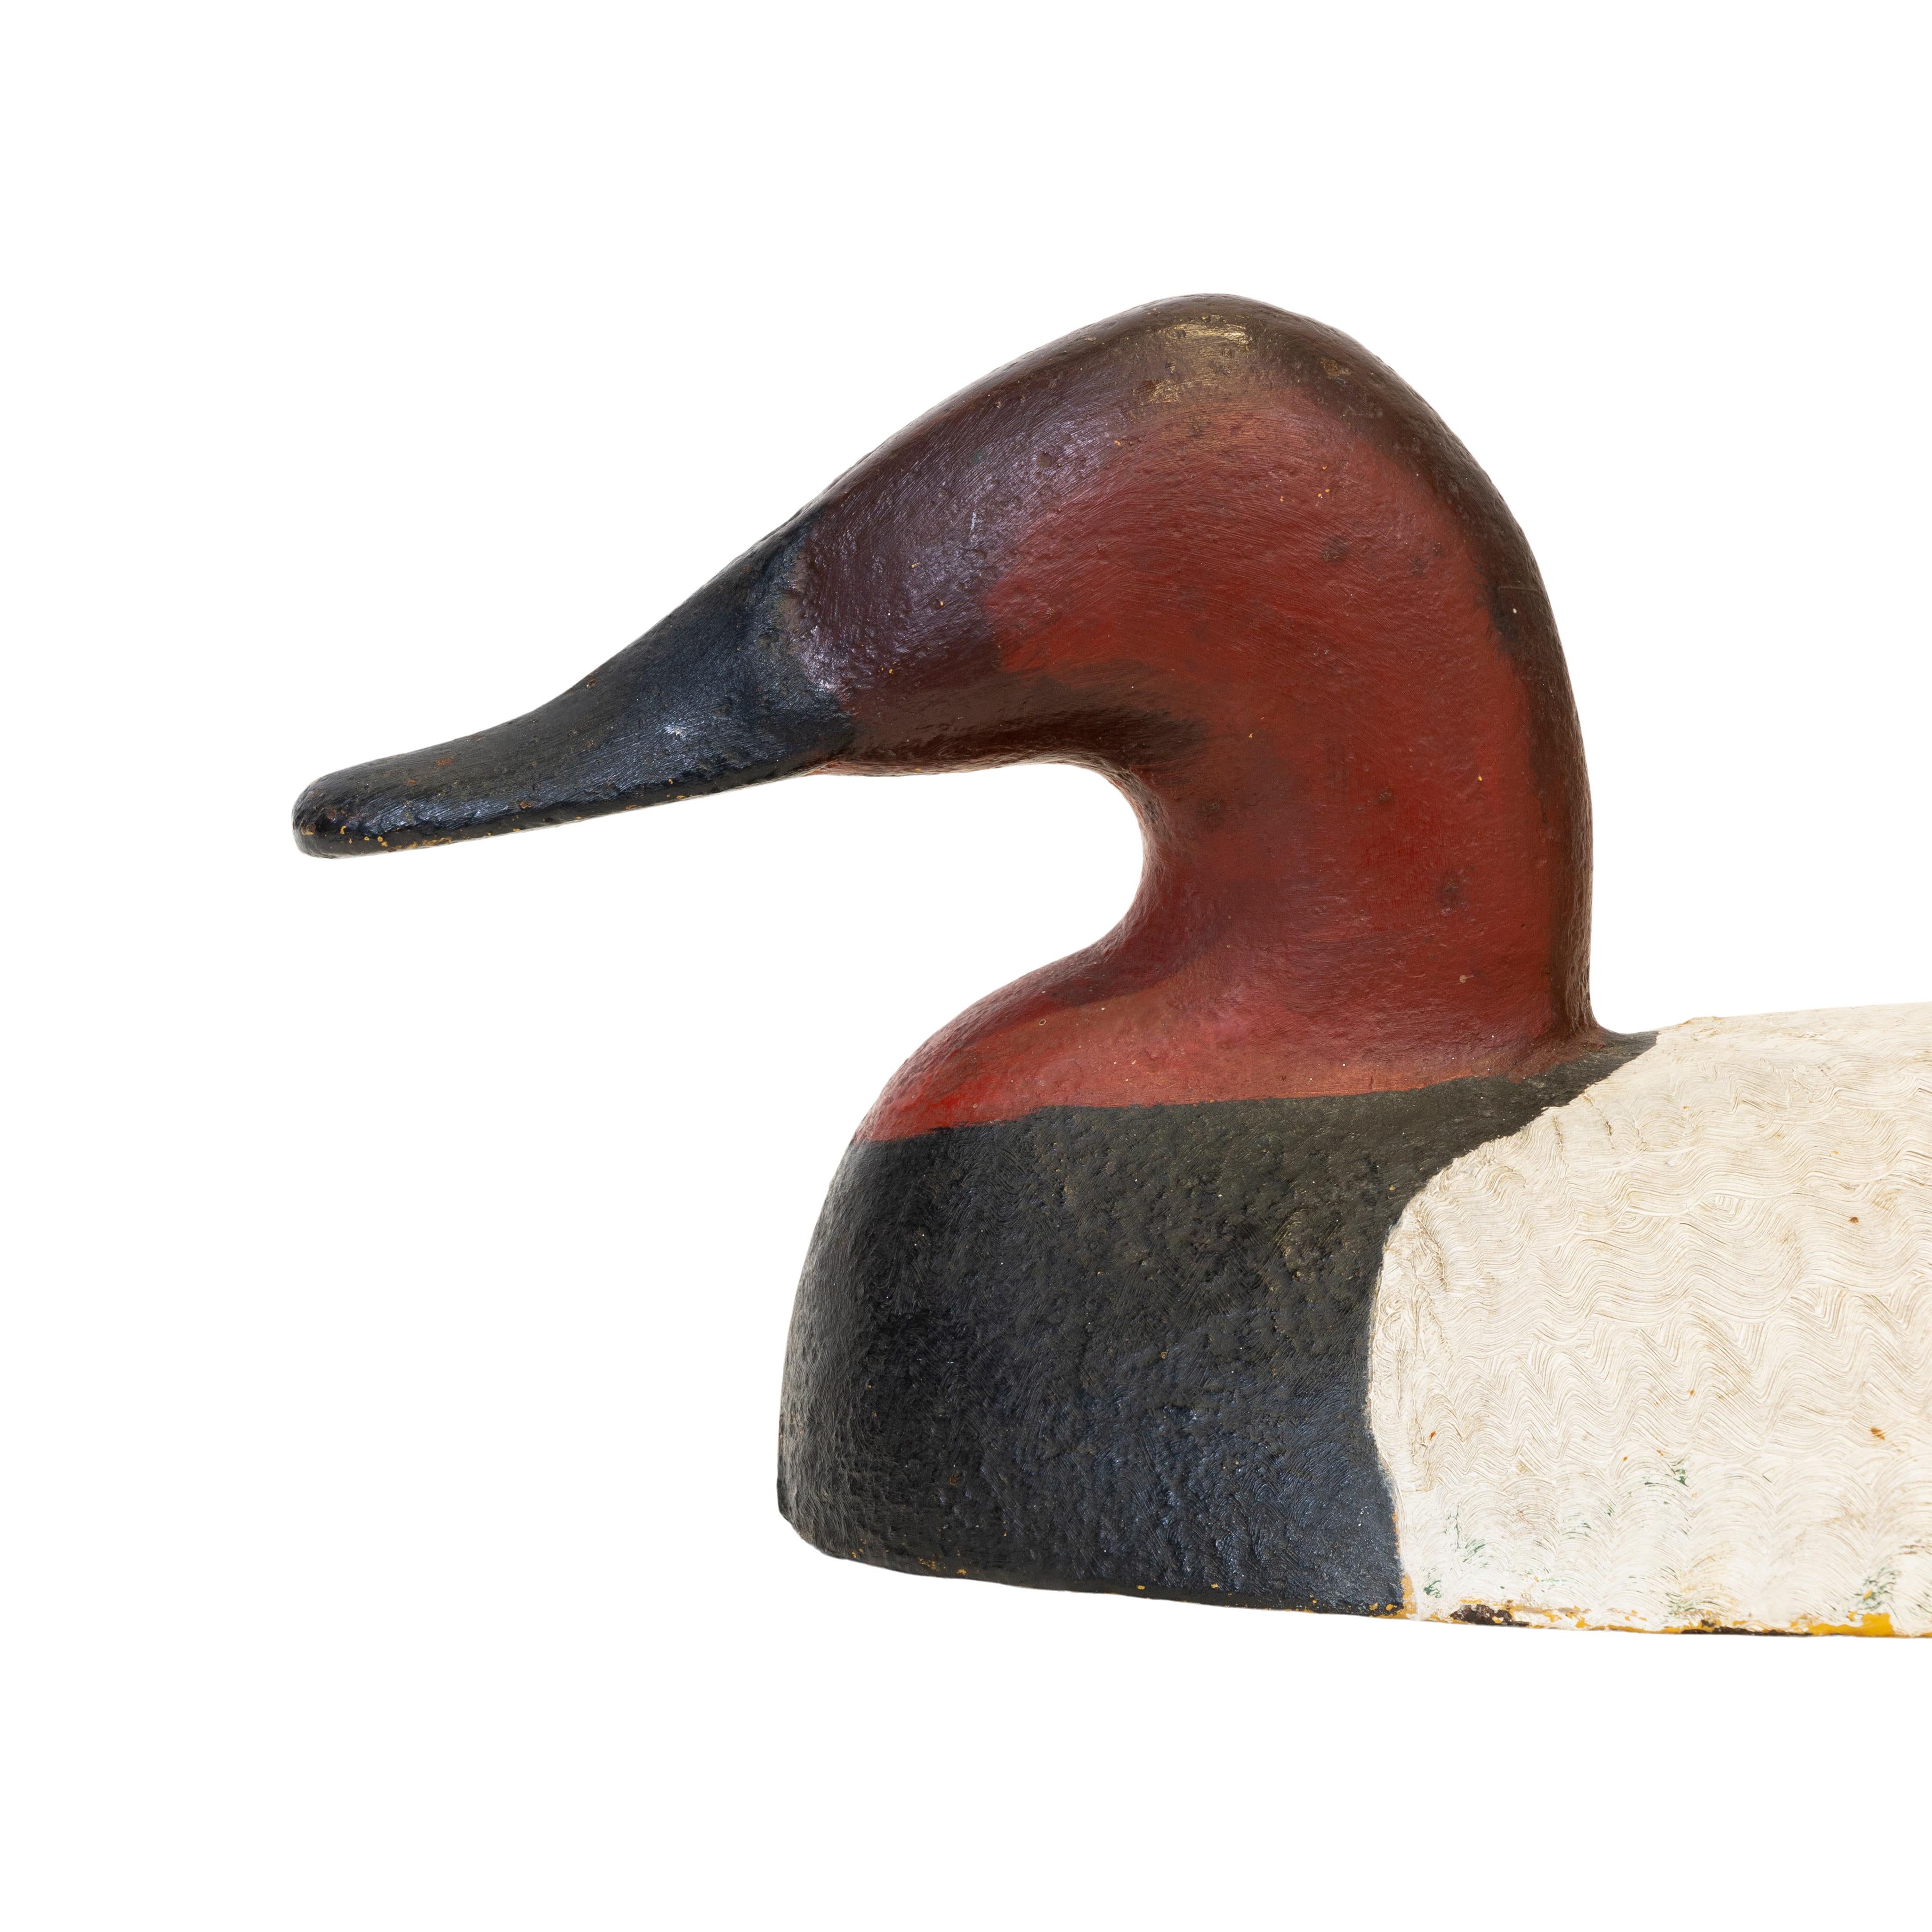 Pair of canvas back sink box canvasback decoys used by a market hunter on Long Island. Original paint. Over 20 pounds each.

Period: Last quarter 19th century

Origin: Sanders Foundry, NC

Size: 15